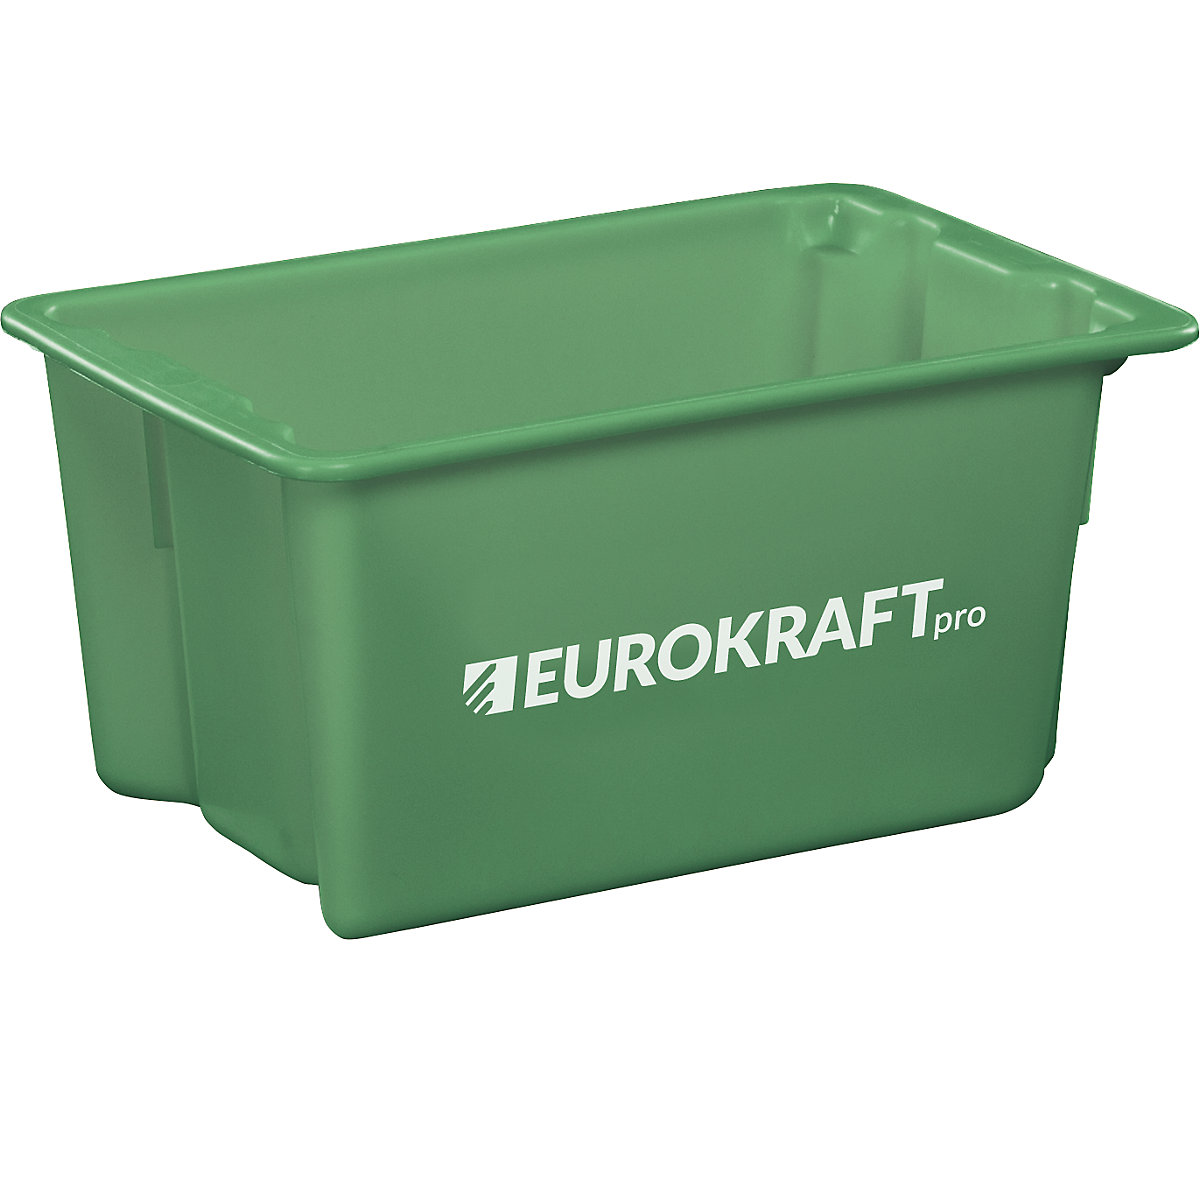 Stack/nest container made of polypropylene suitable for foodstuffs – eurokraft pro, 50 l capacity, pack of 3, solid walls and base, green